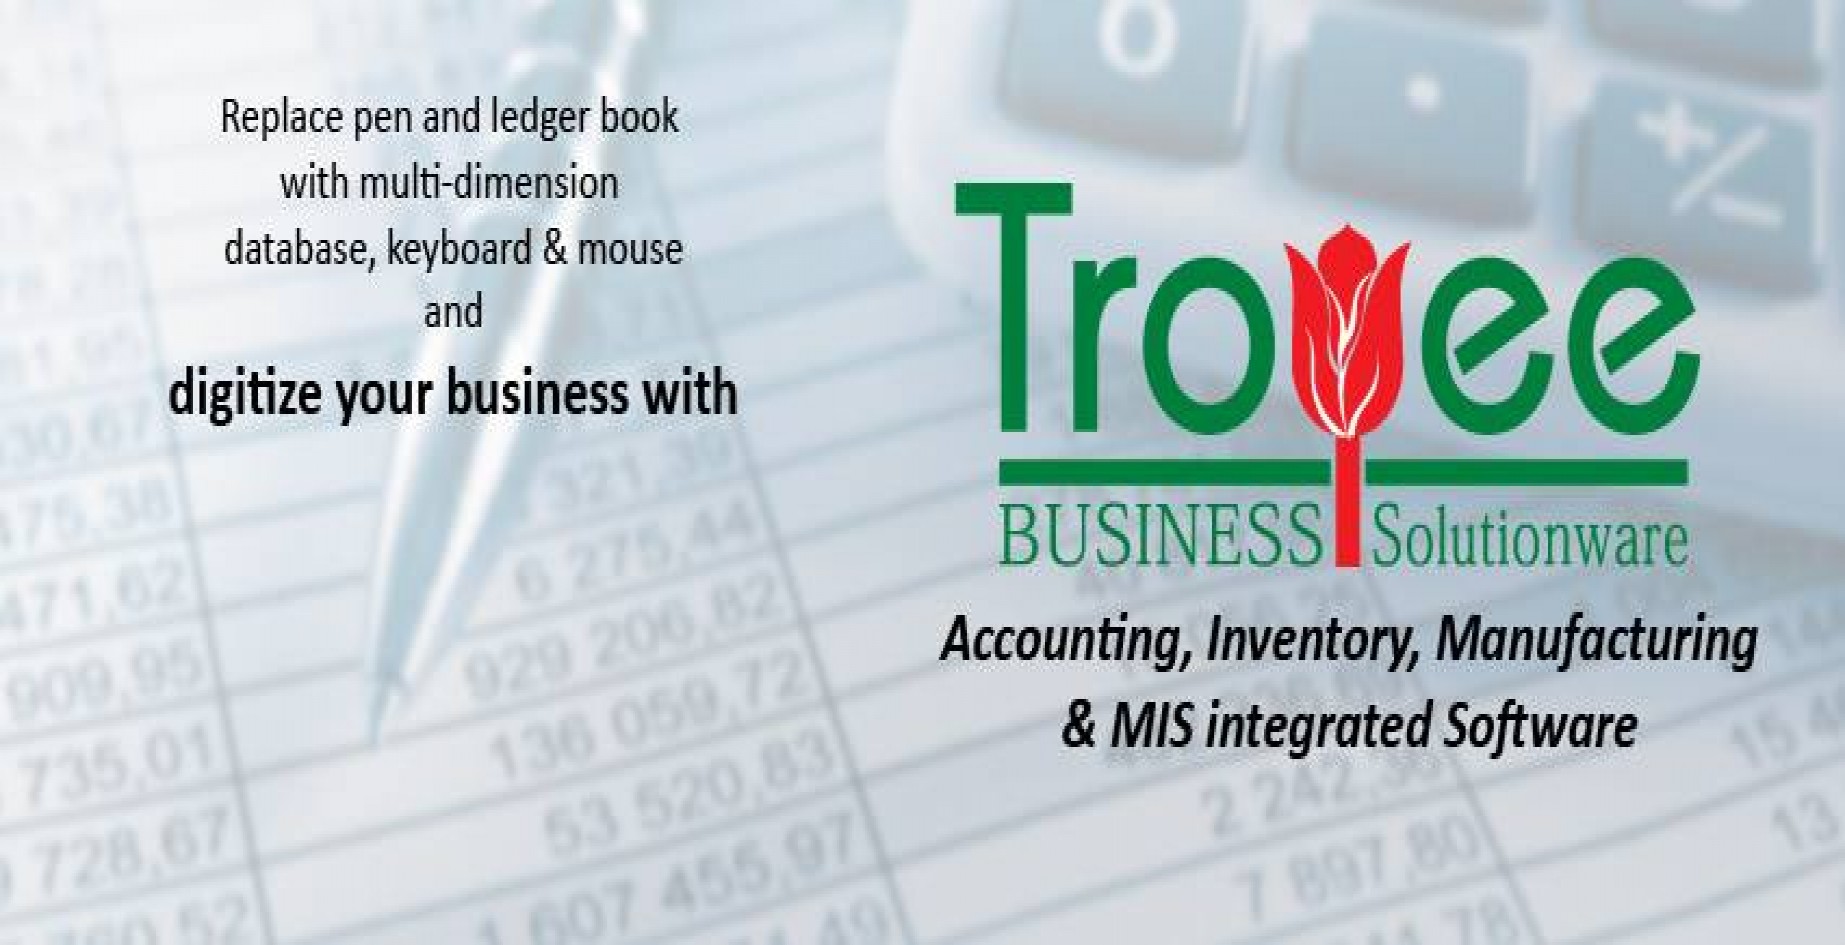                                                            Accounting-Inventory-Manufacturing & MIS integrated Software